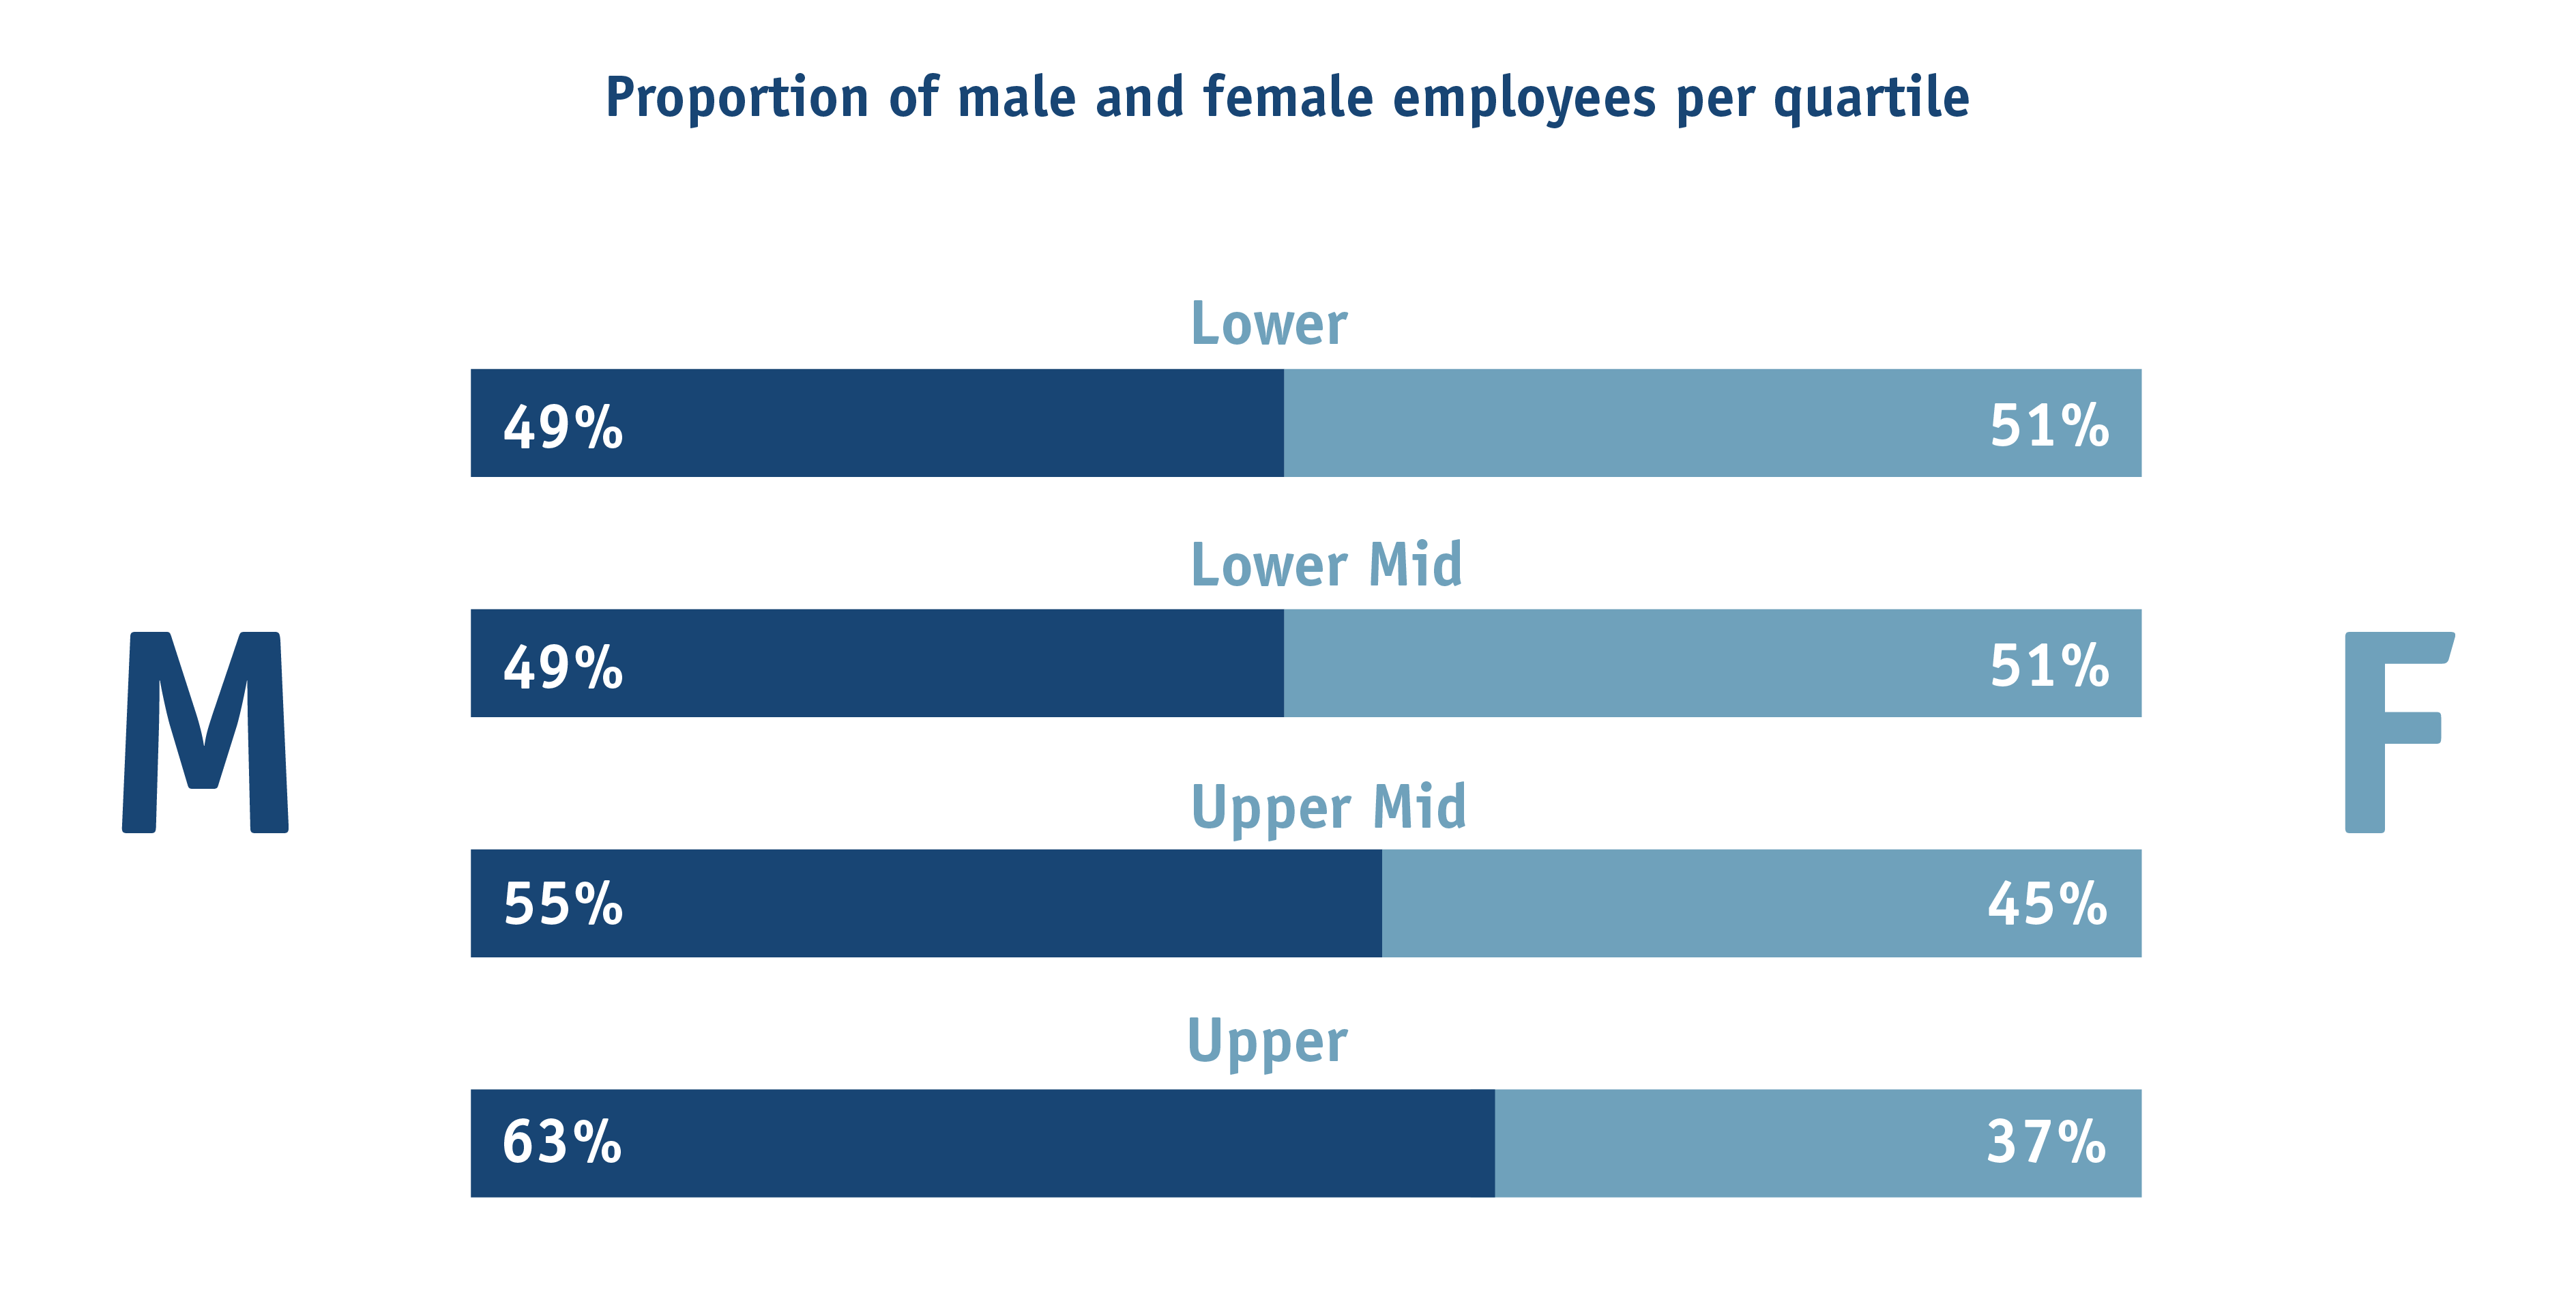 Proportion of males and females in each quartile band